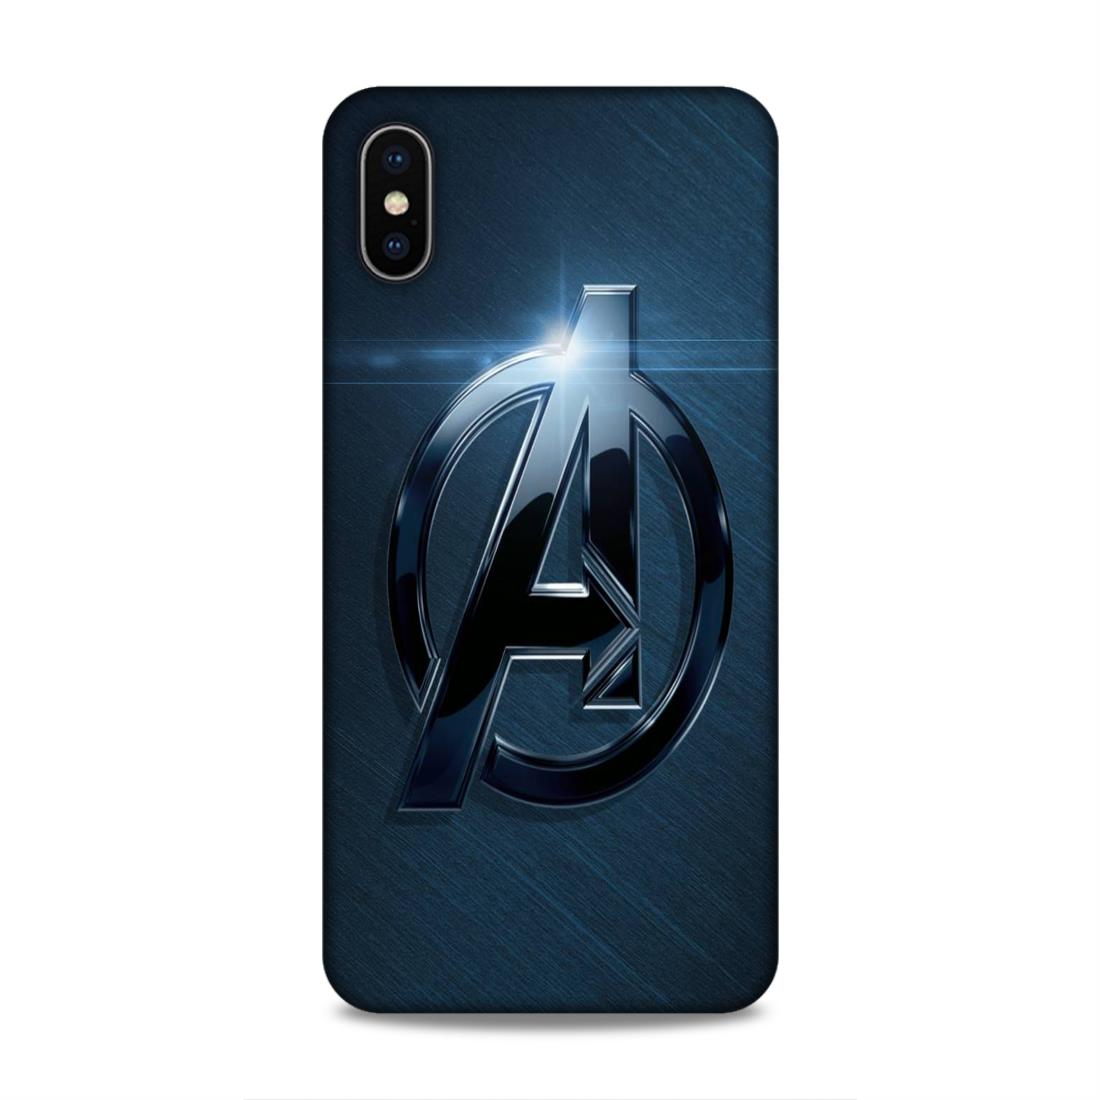 Avengers Hard Back Case For Apple iPhone XS Max